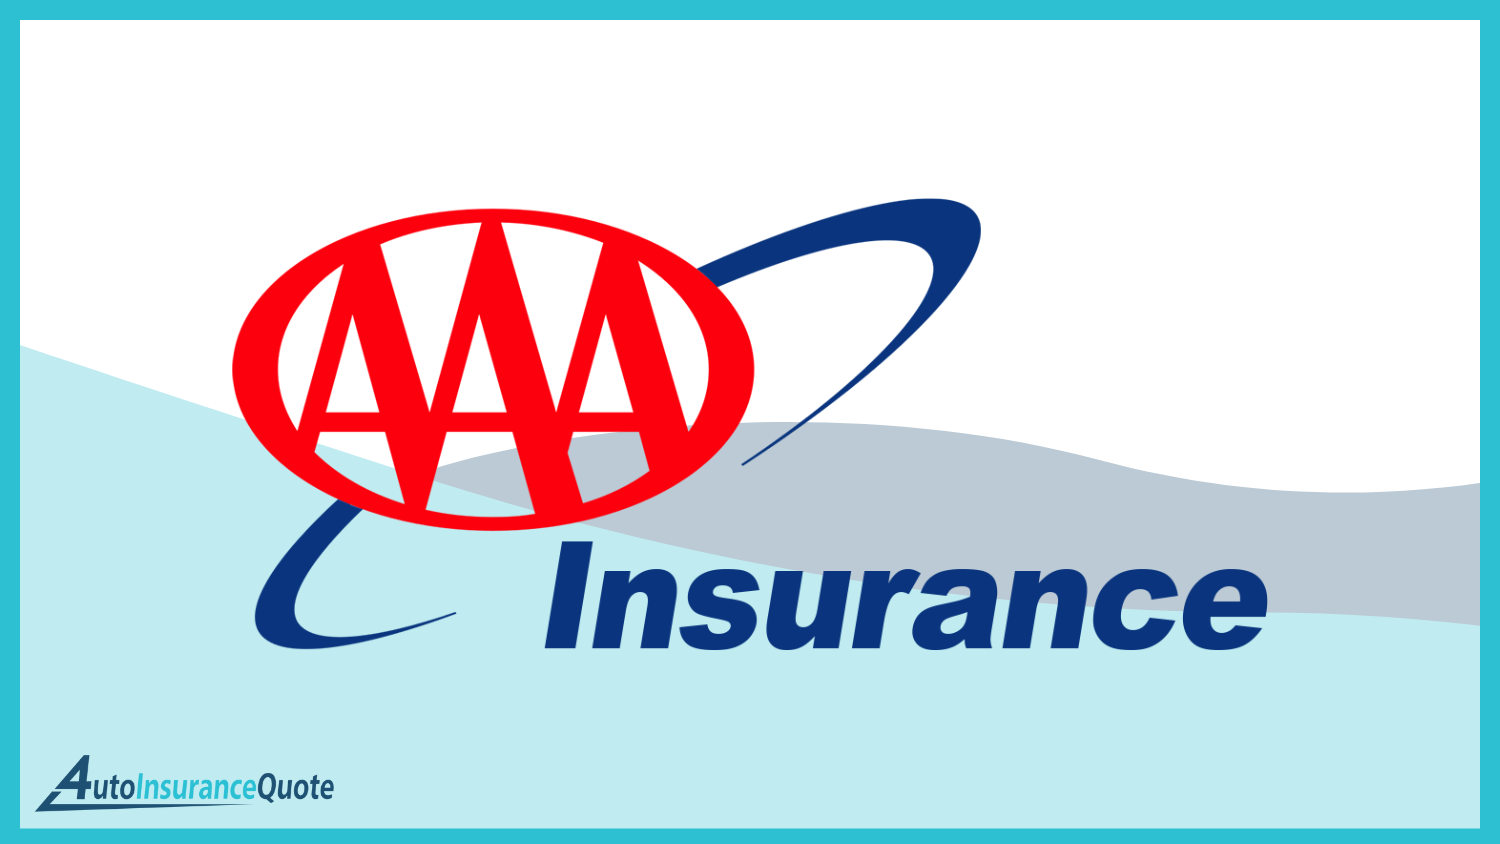 AAA: Cheap Auto Insurance for Unlicensed Drivers